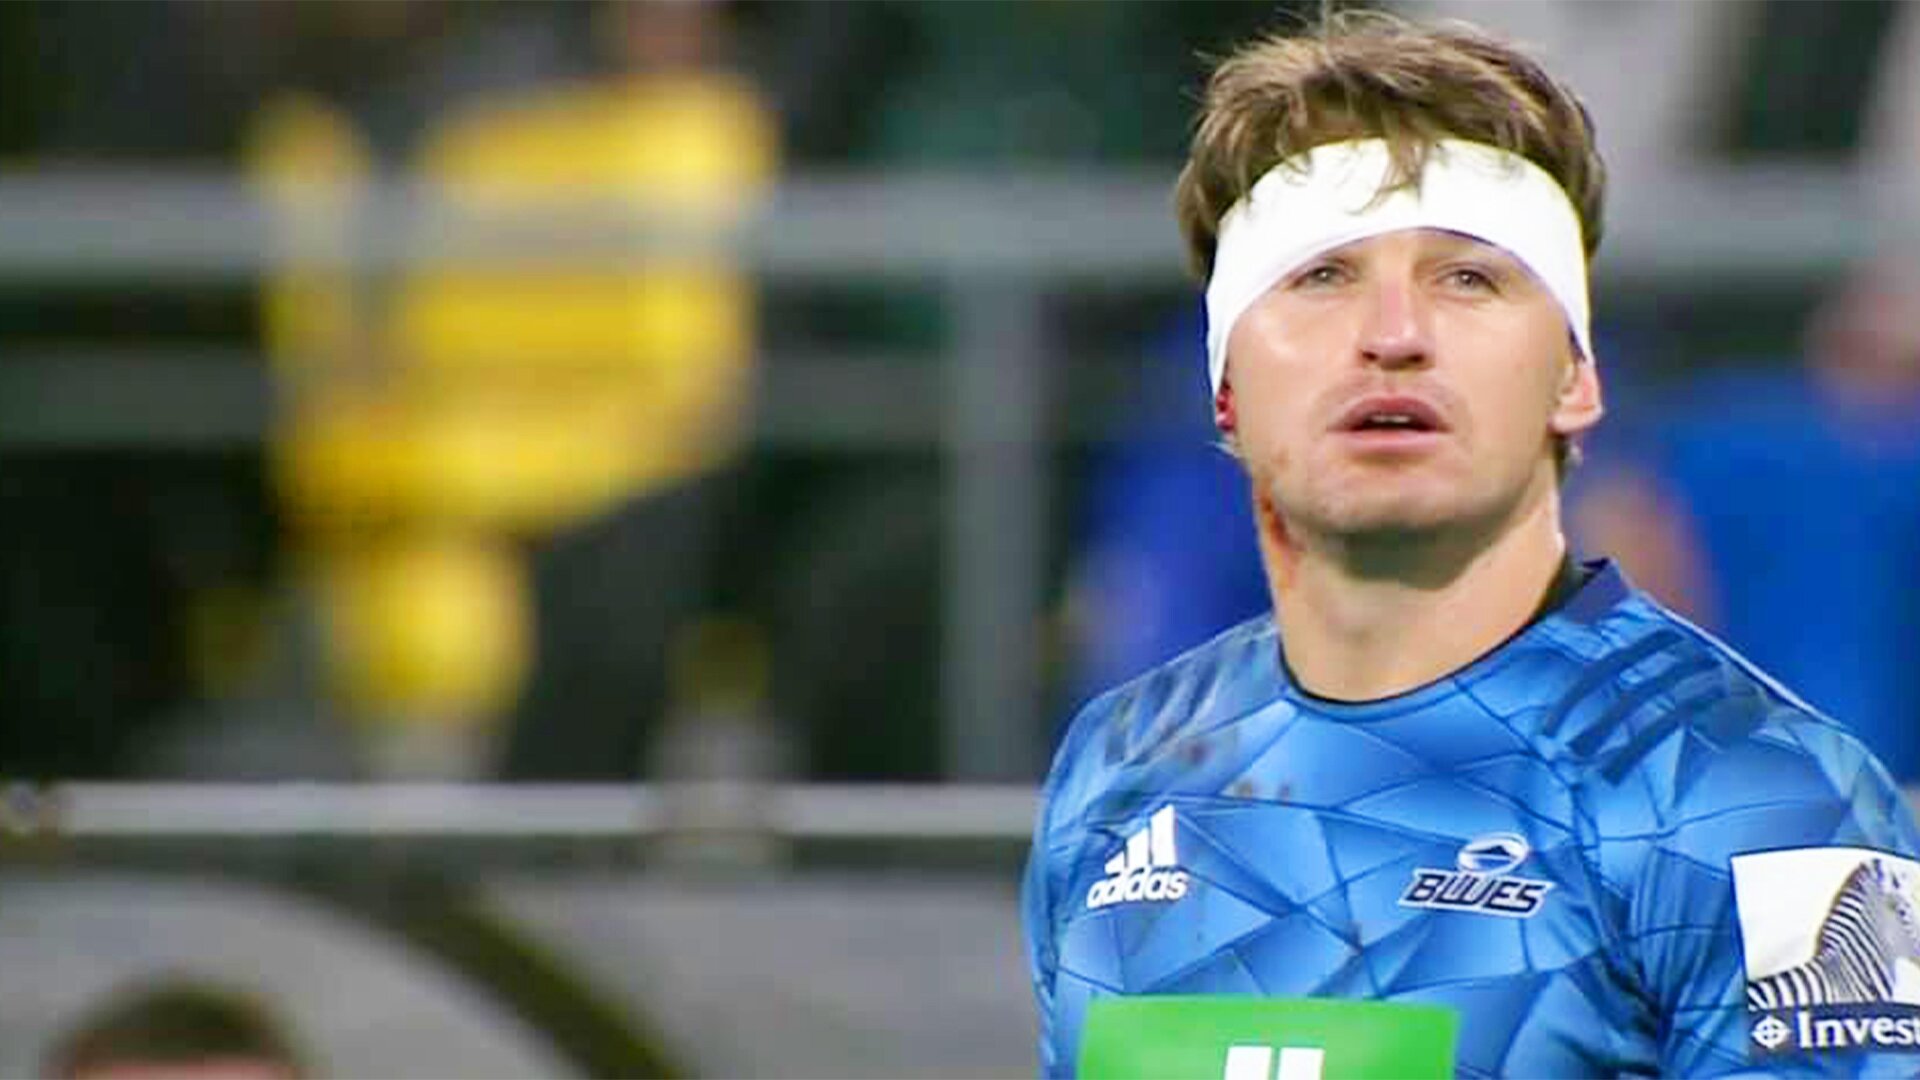 The moment Beauden Barrett realised that the whole stadium of his former team were booing him